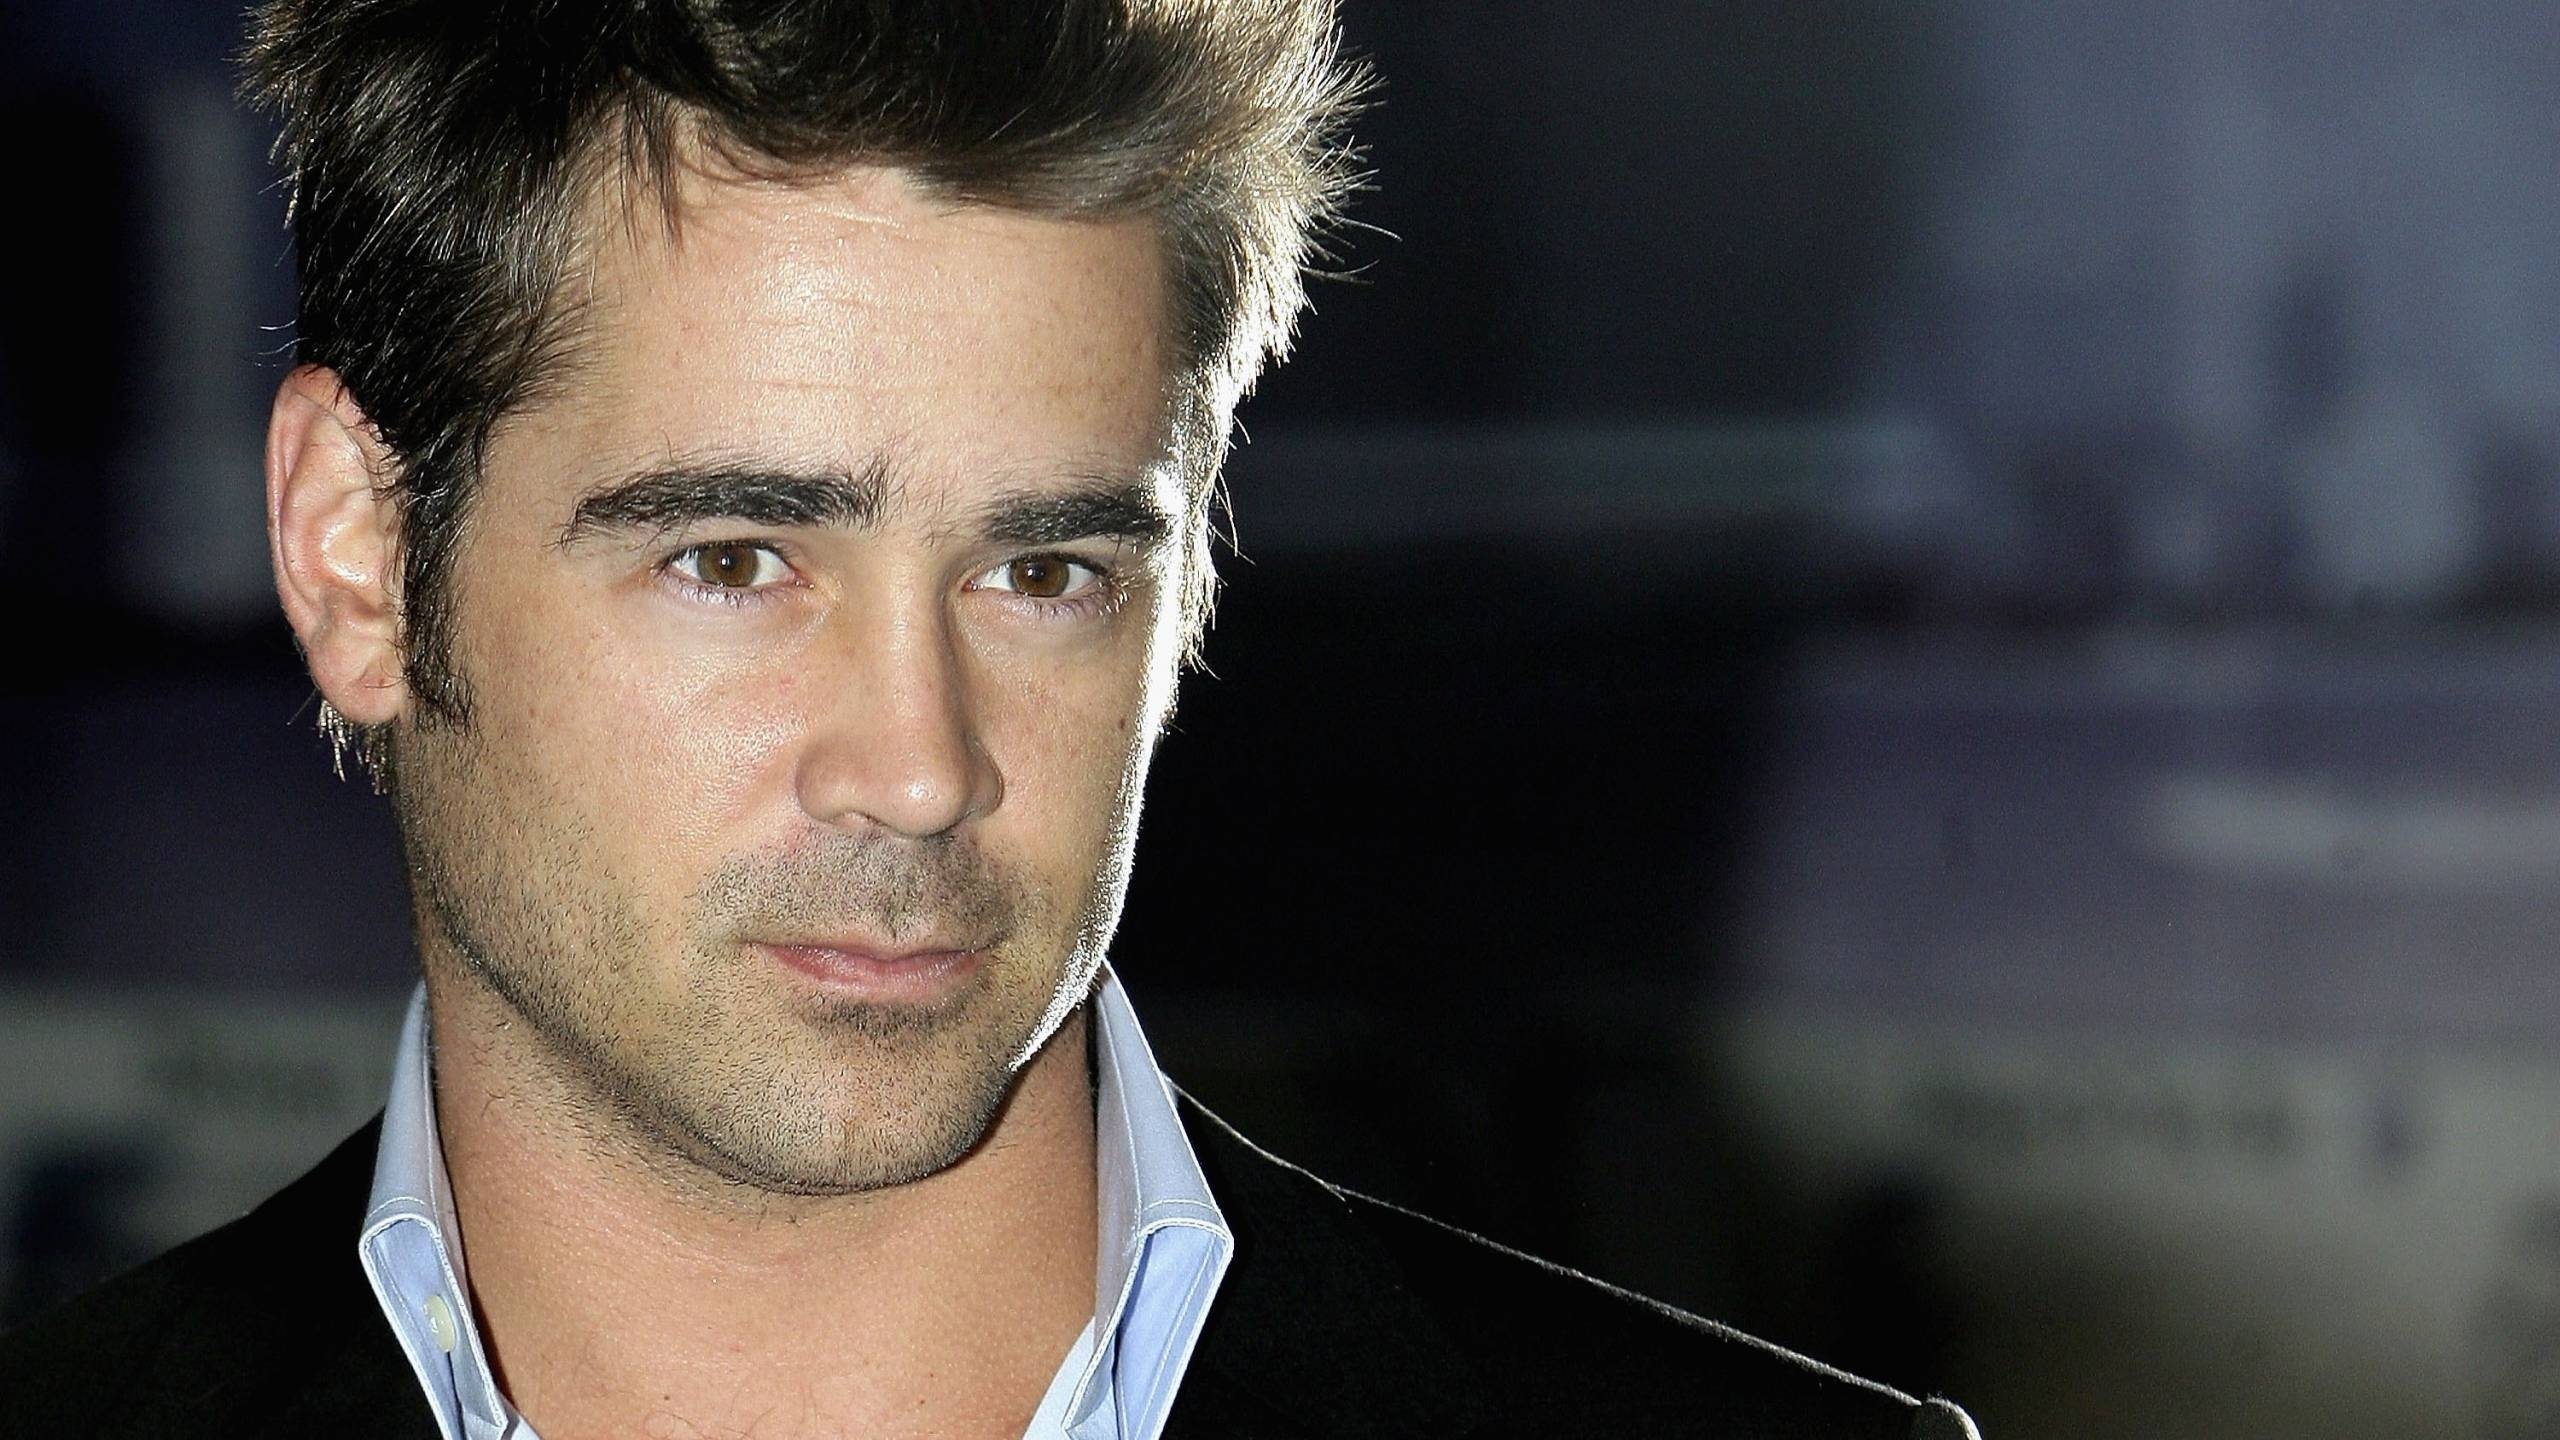 Colin Farrell Close Up for 2560x1440 HDTV resolution